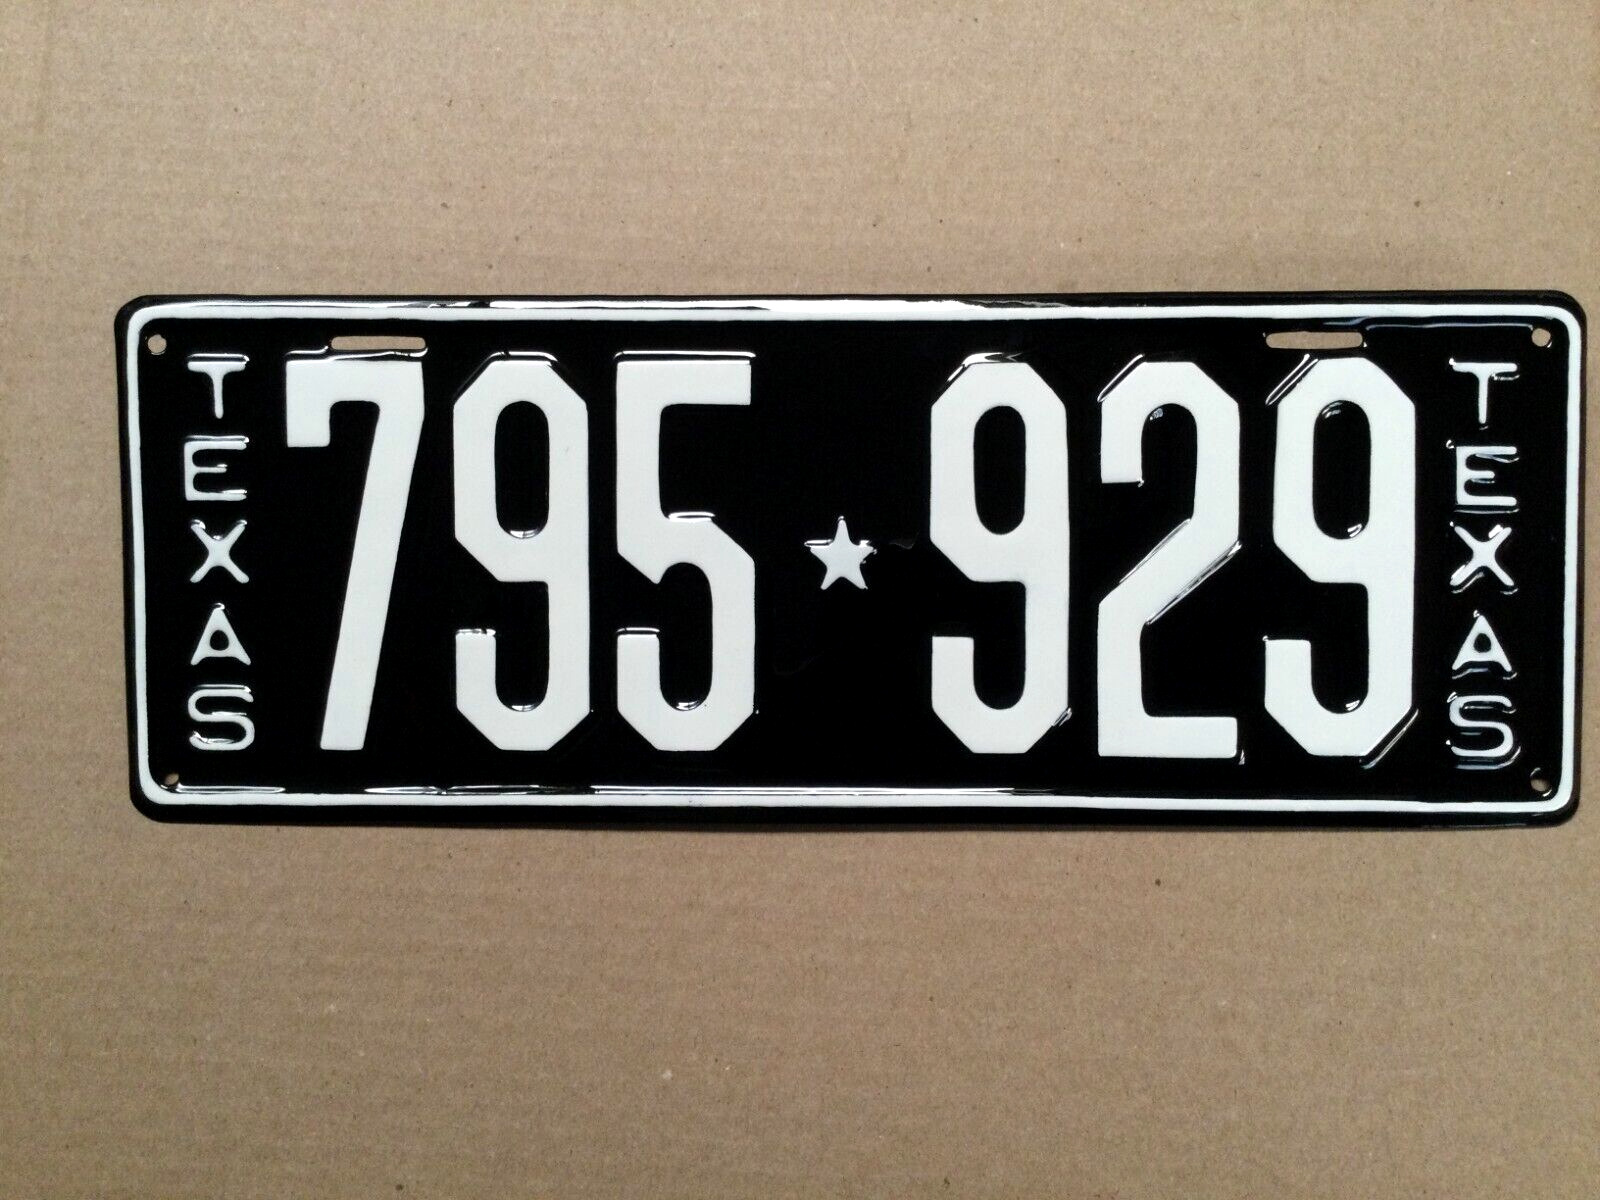 VINTAGE 1923-1924 TEXAS TX. LICENSE PLATE VERY NICELY RESTORED HIGH QUALITY